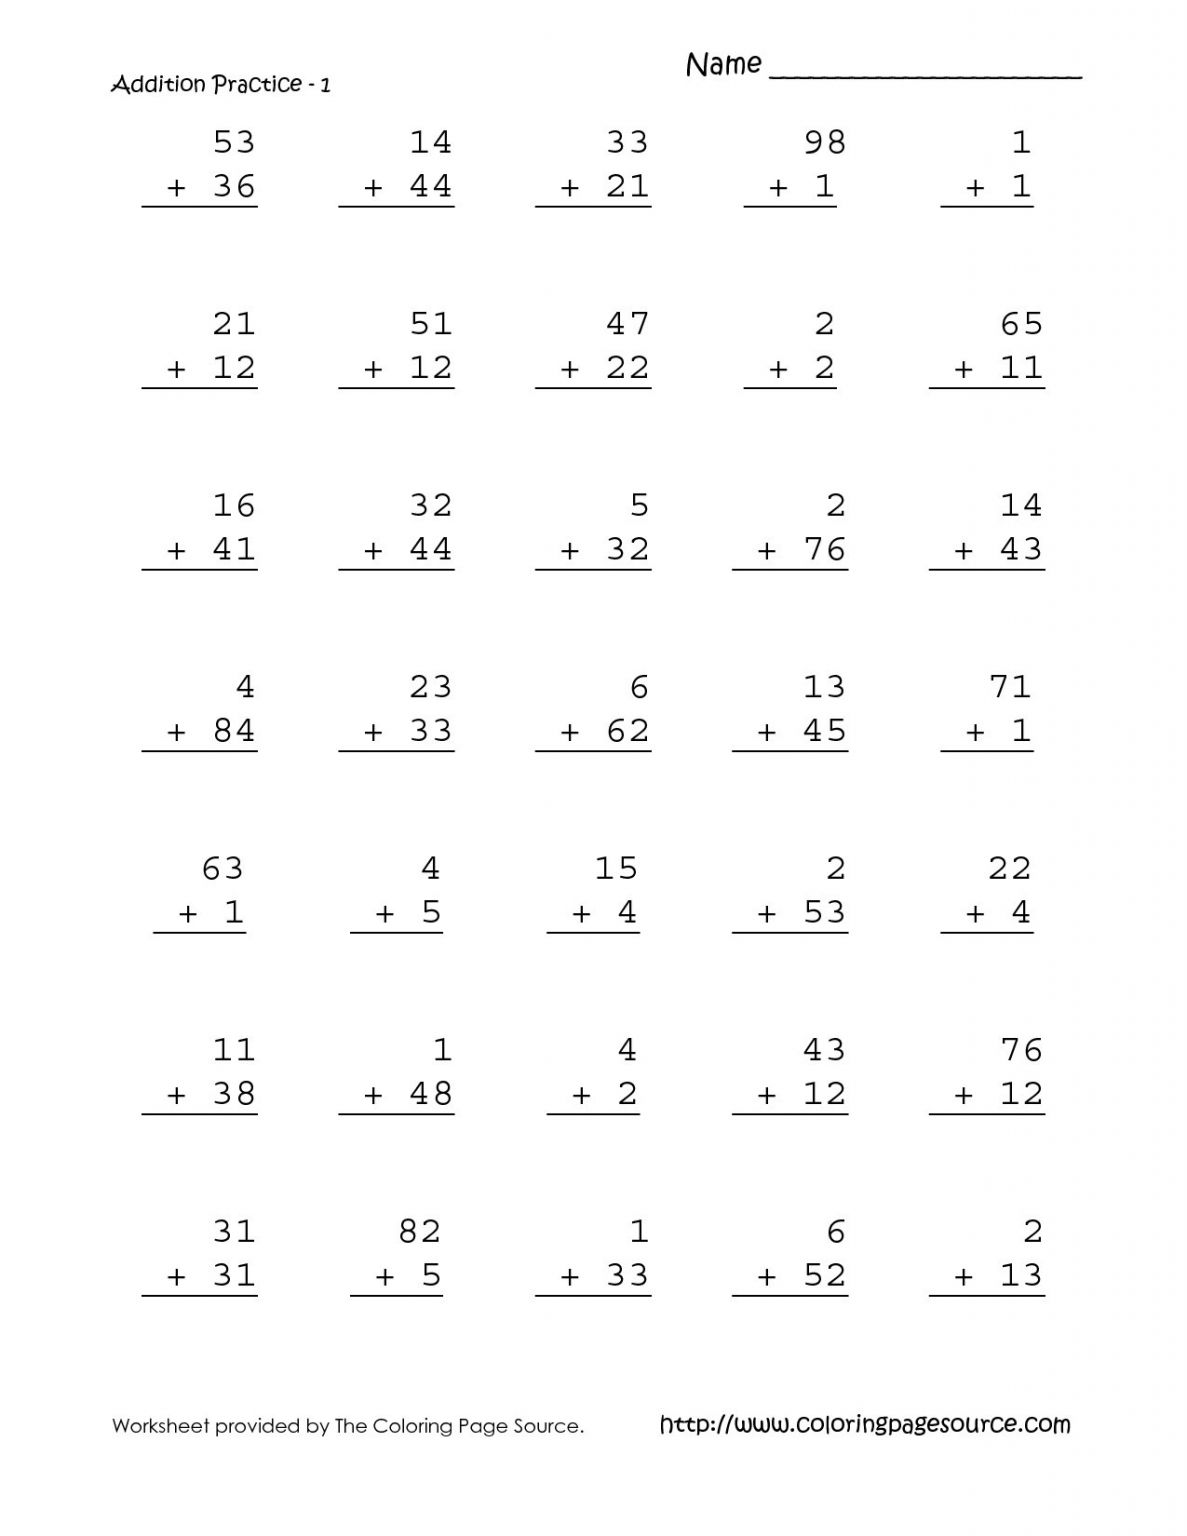 4 Free Math Worksheets Second Grade 2 Addition Adding Whole Tens 3 Addends AMP